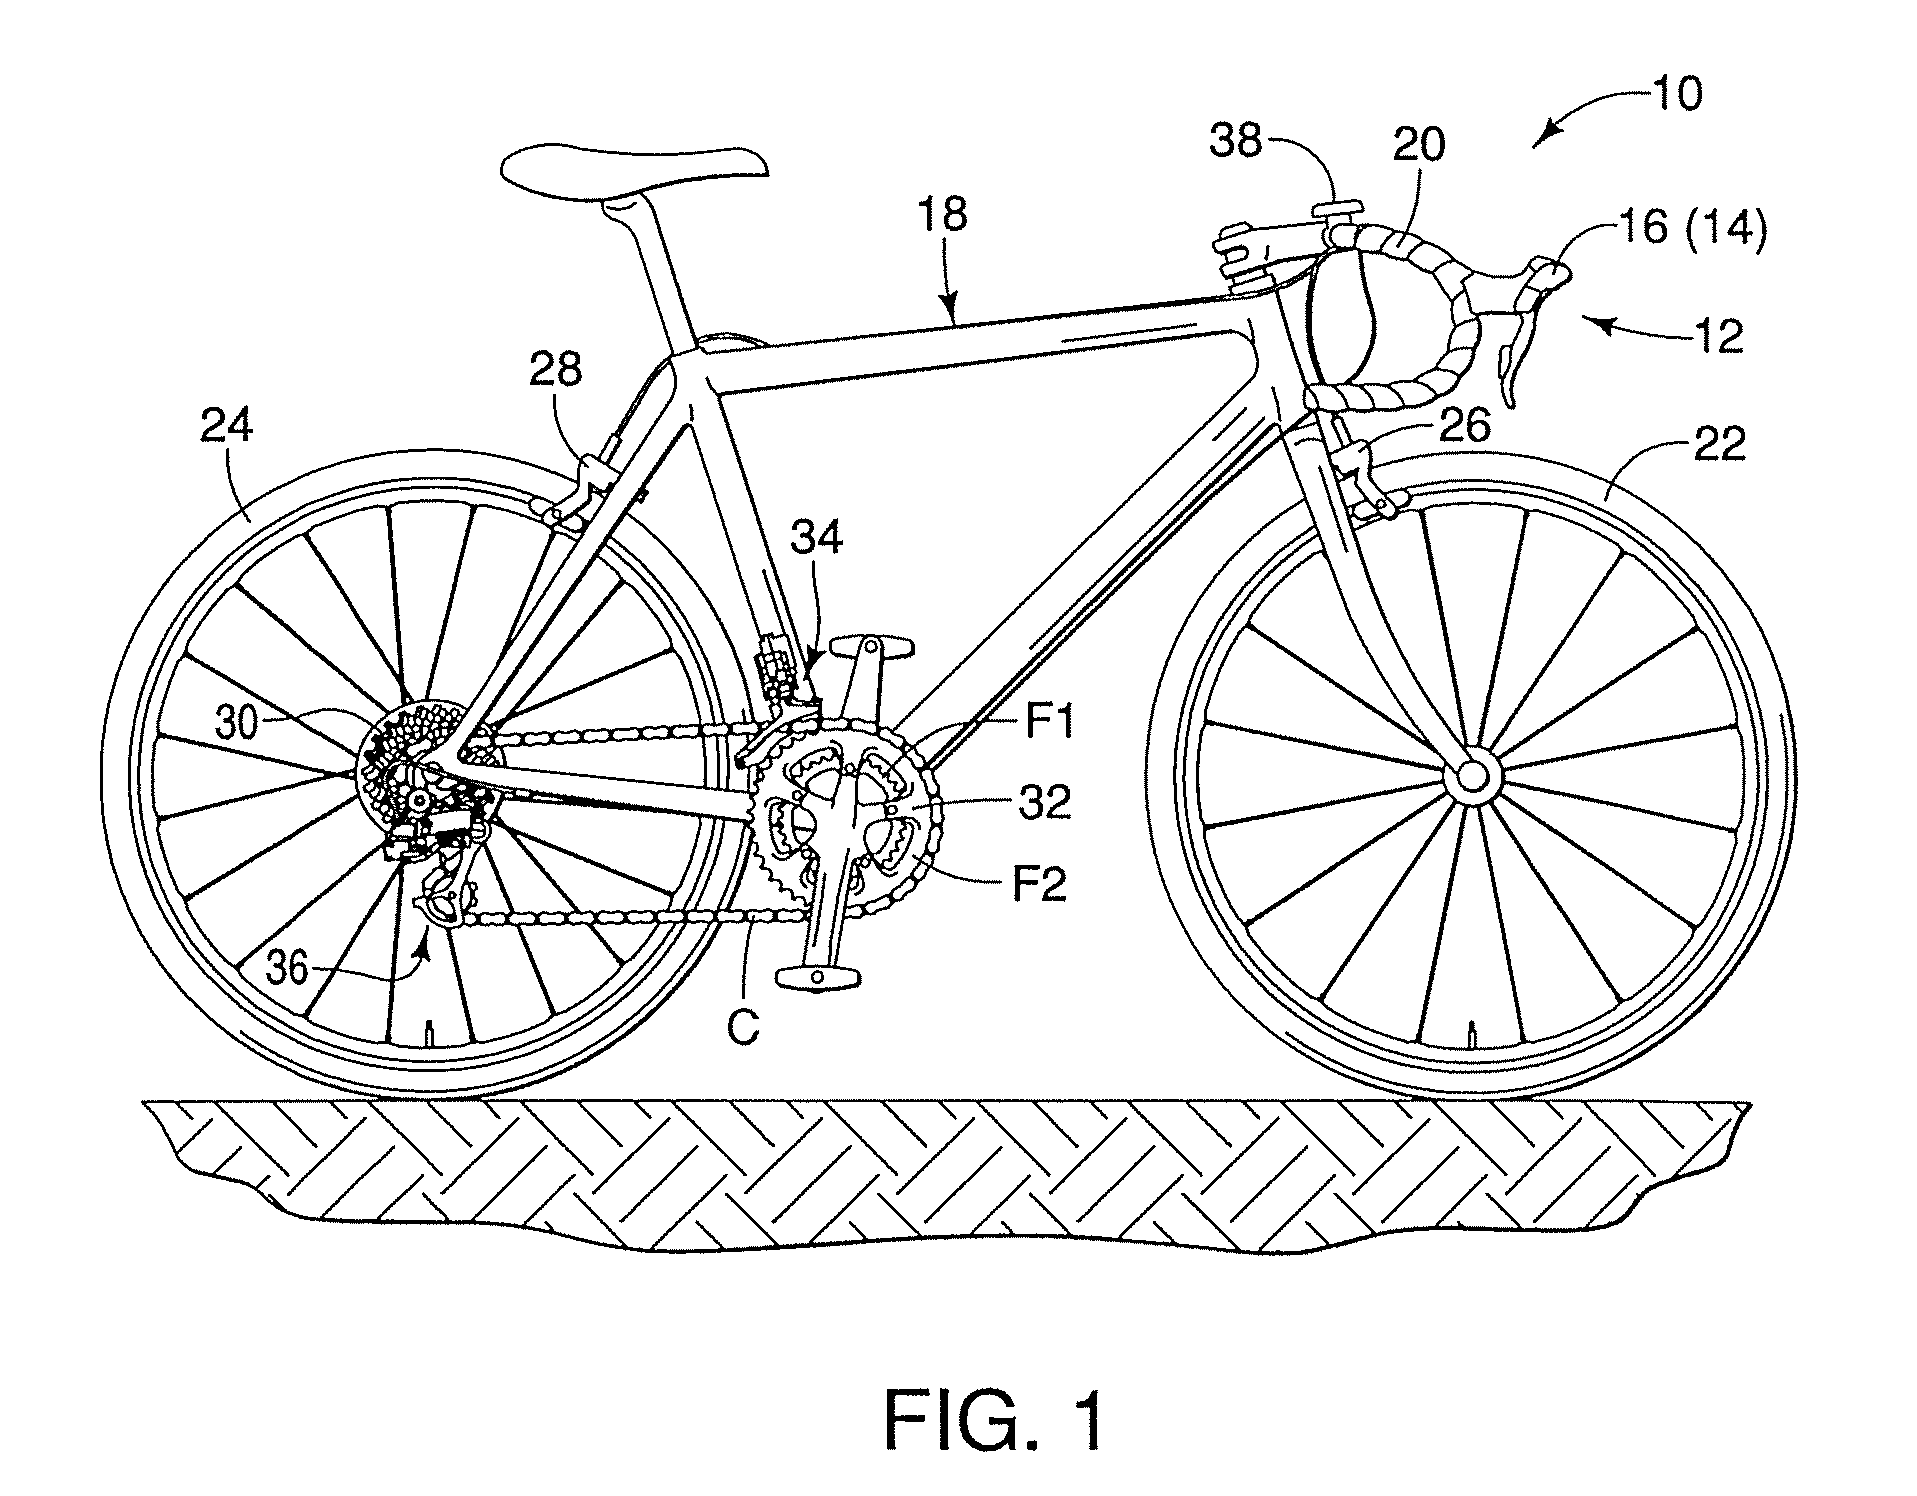 Bicycle control system having a value generating unit